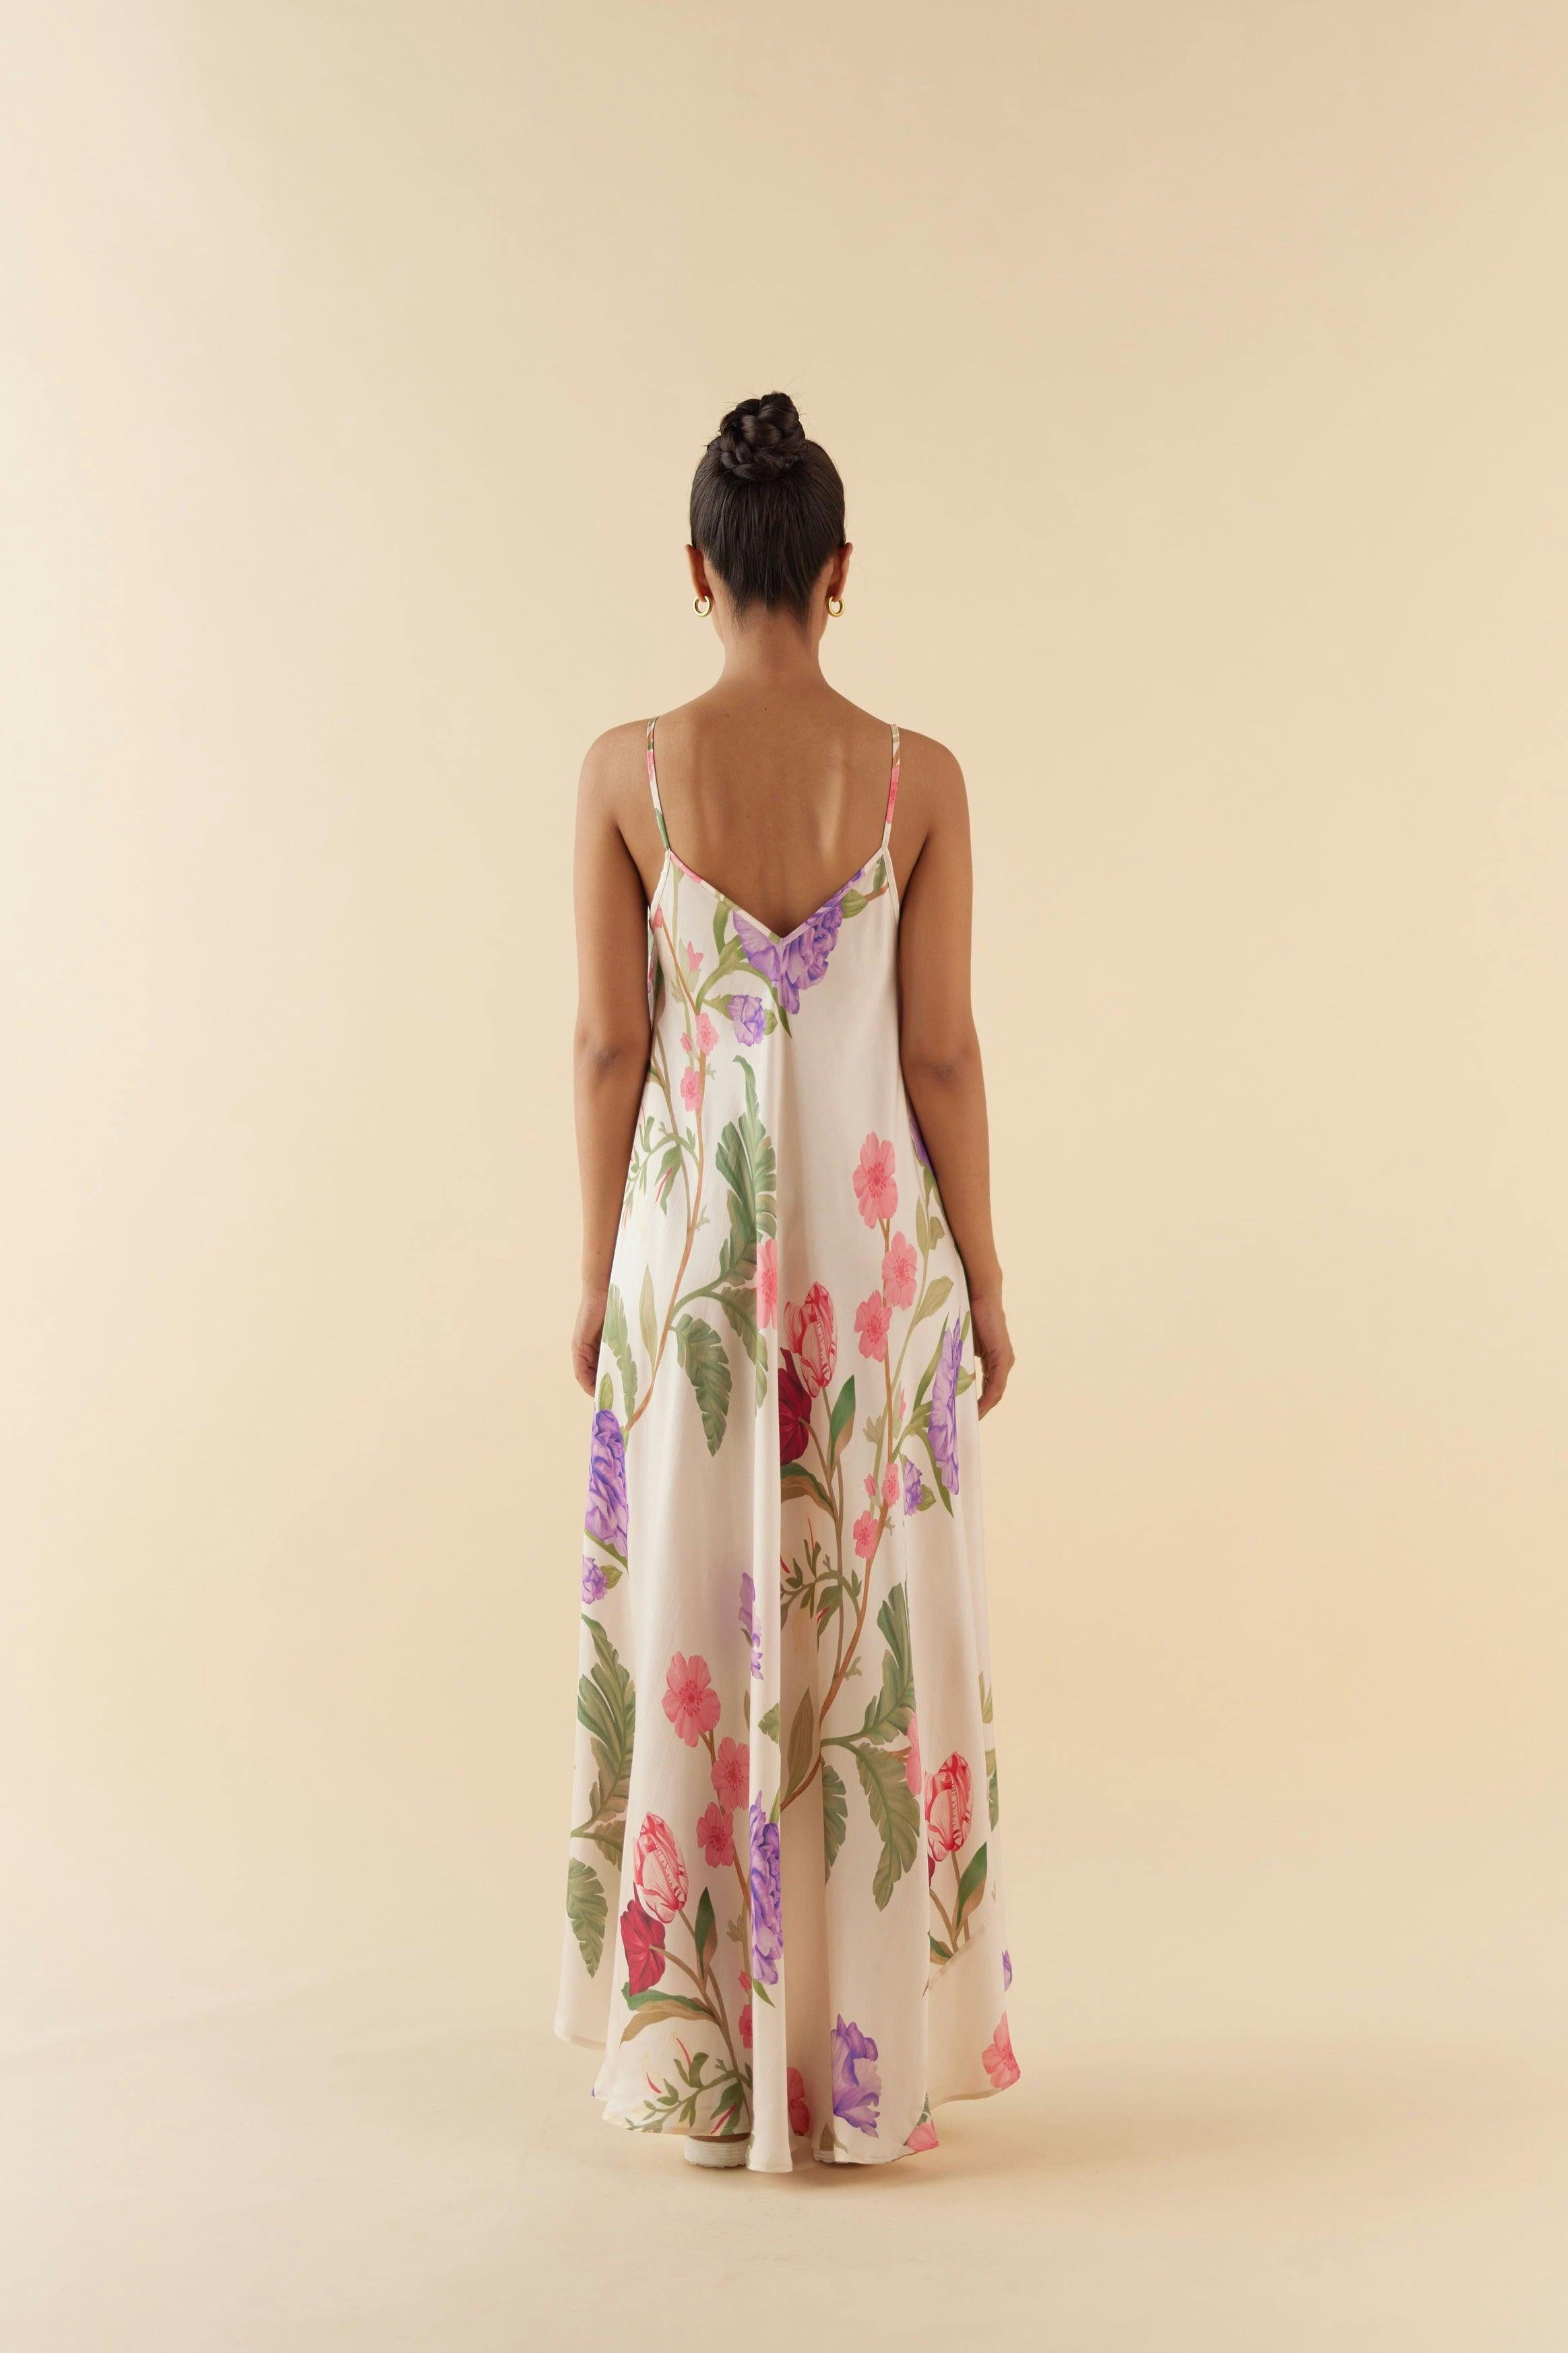 Thumbnail preview #1 for Floral Dream Lounge Cami Dress